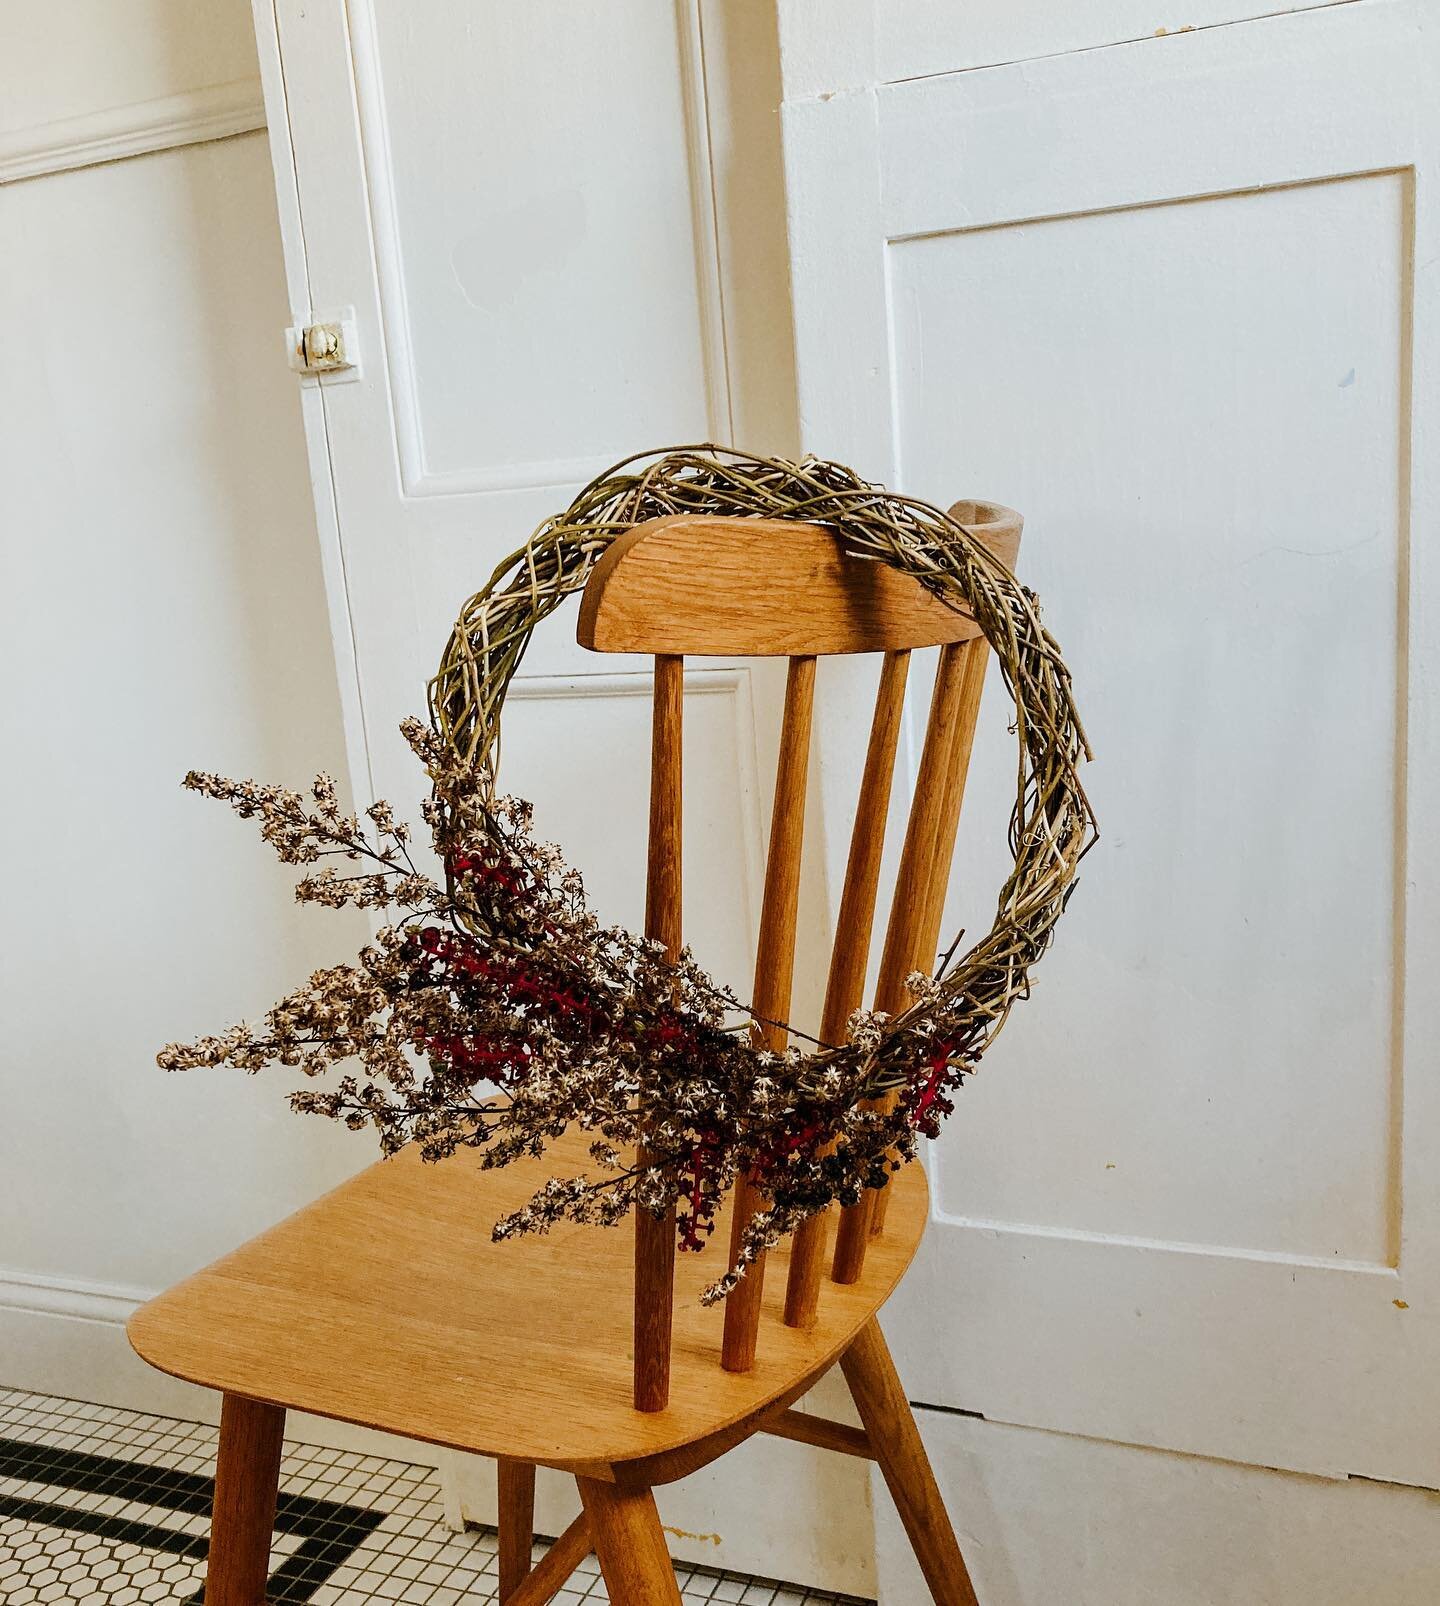 A little goldenrod and pokeweed berry wreath. Native plants the color of cranberries and stuffing. I spent the summer pulling out stray vines around our yard and twisted together the frame just to make shaggy messes like this.